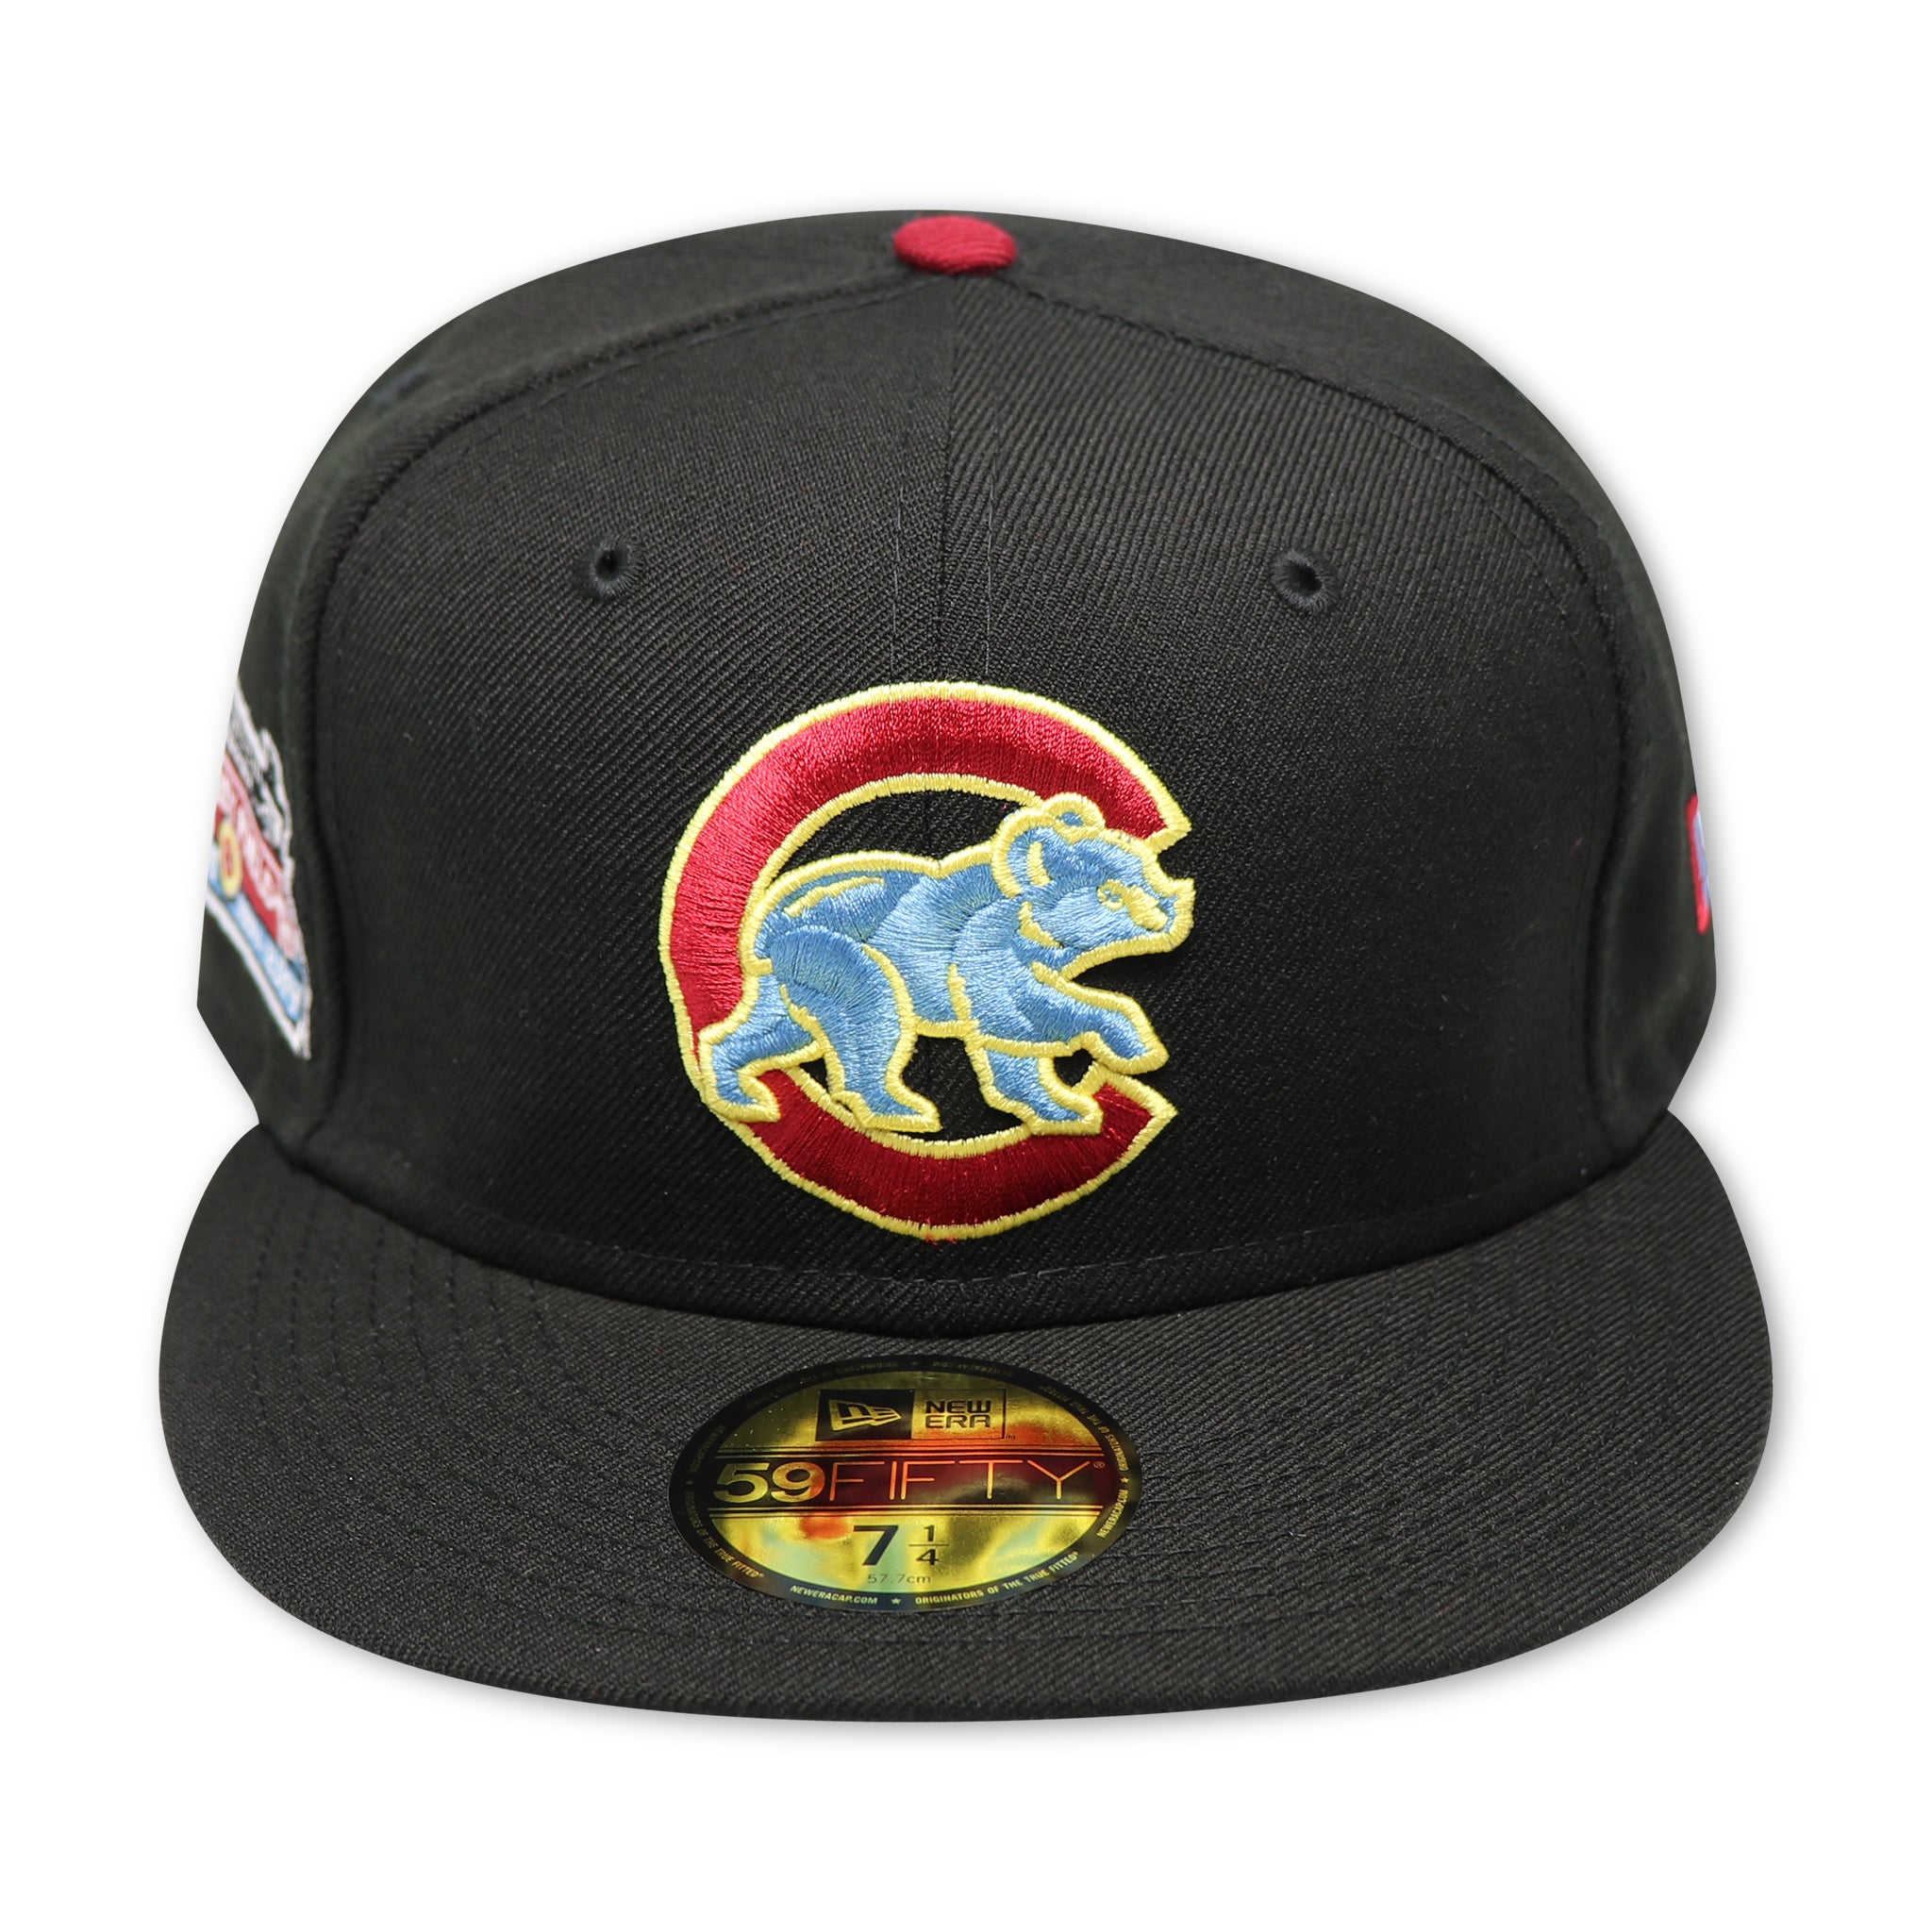 CHICAGO CUBS (WRIGLEY FIELD) NEW ERA 59FIFTY FITTED (SKY BLUE BOTTOM)